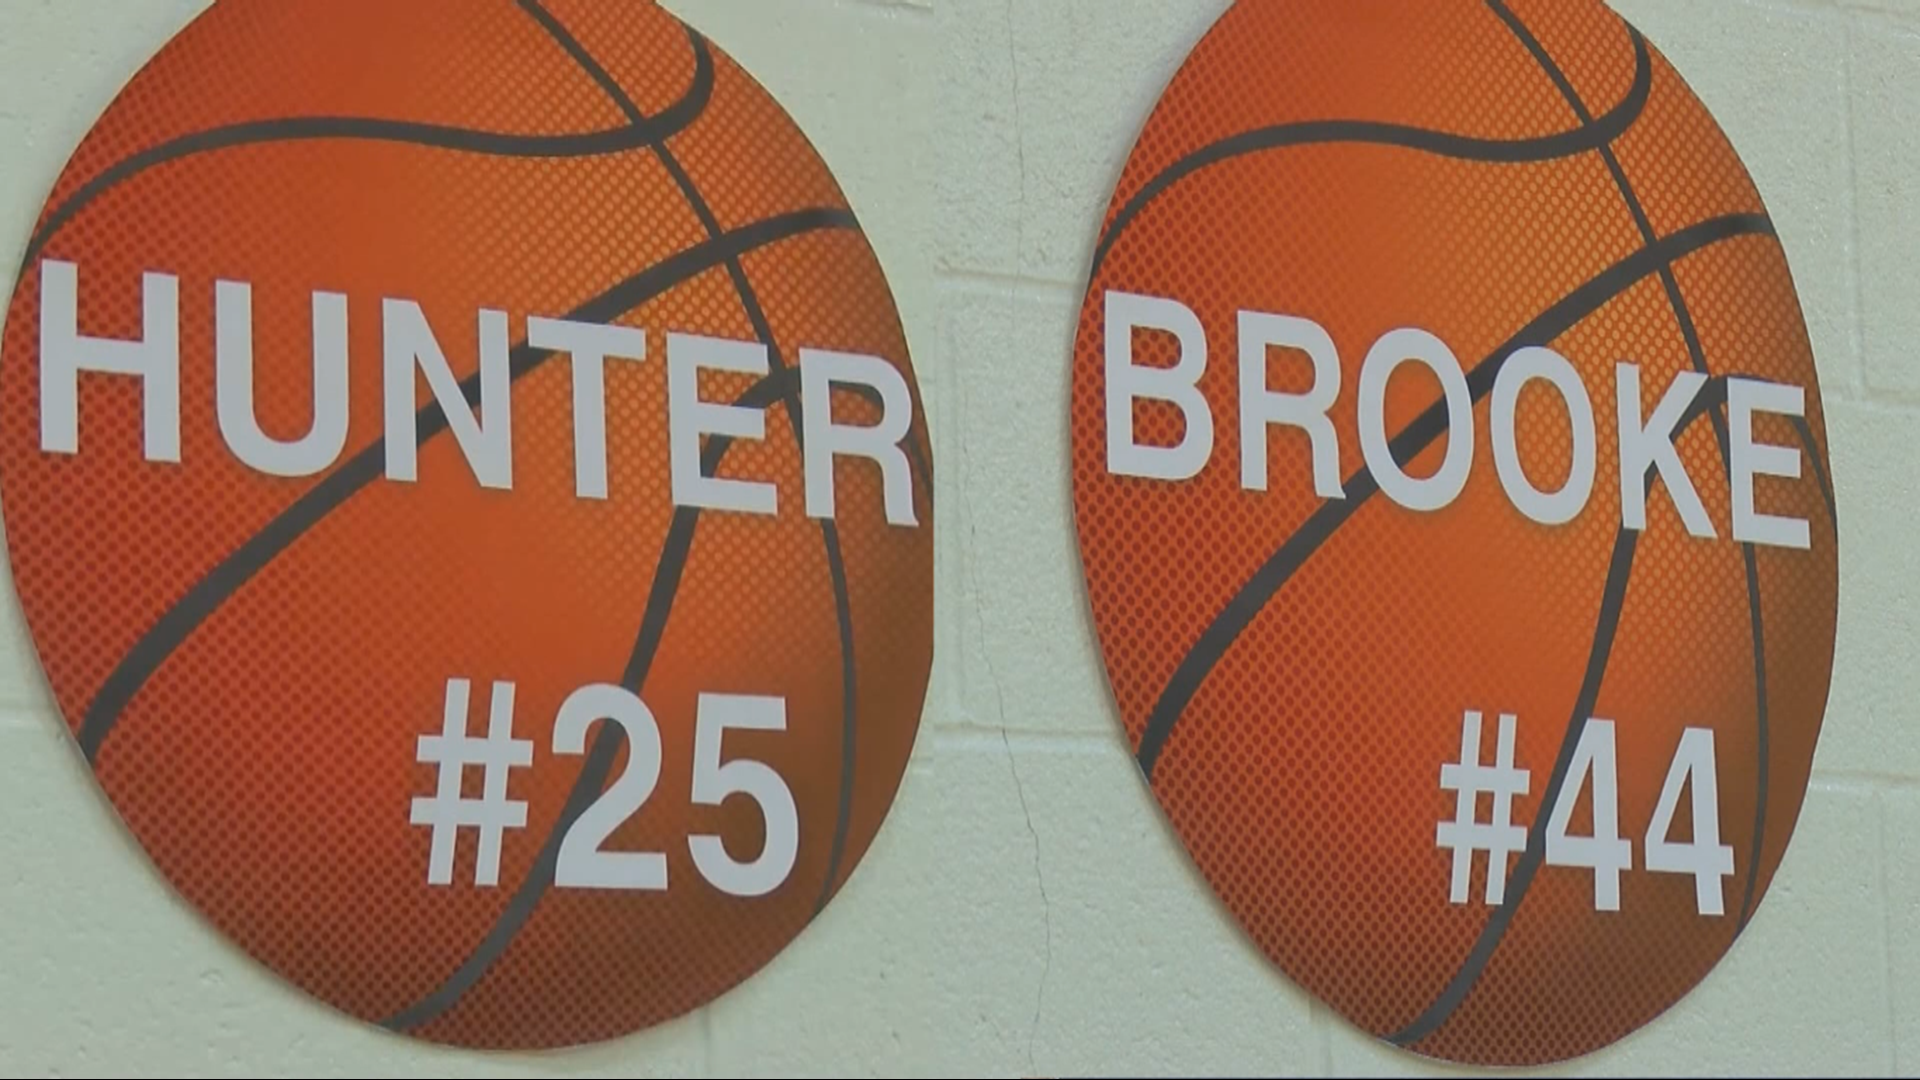 Hunter and Brooke Allen have used their bond of being twins to become standouts on the court at Woodmore High School.